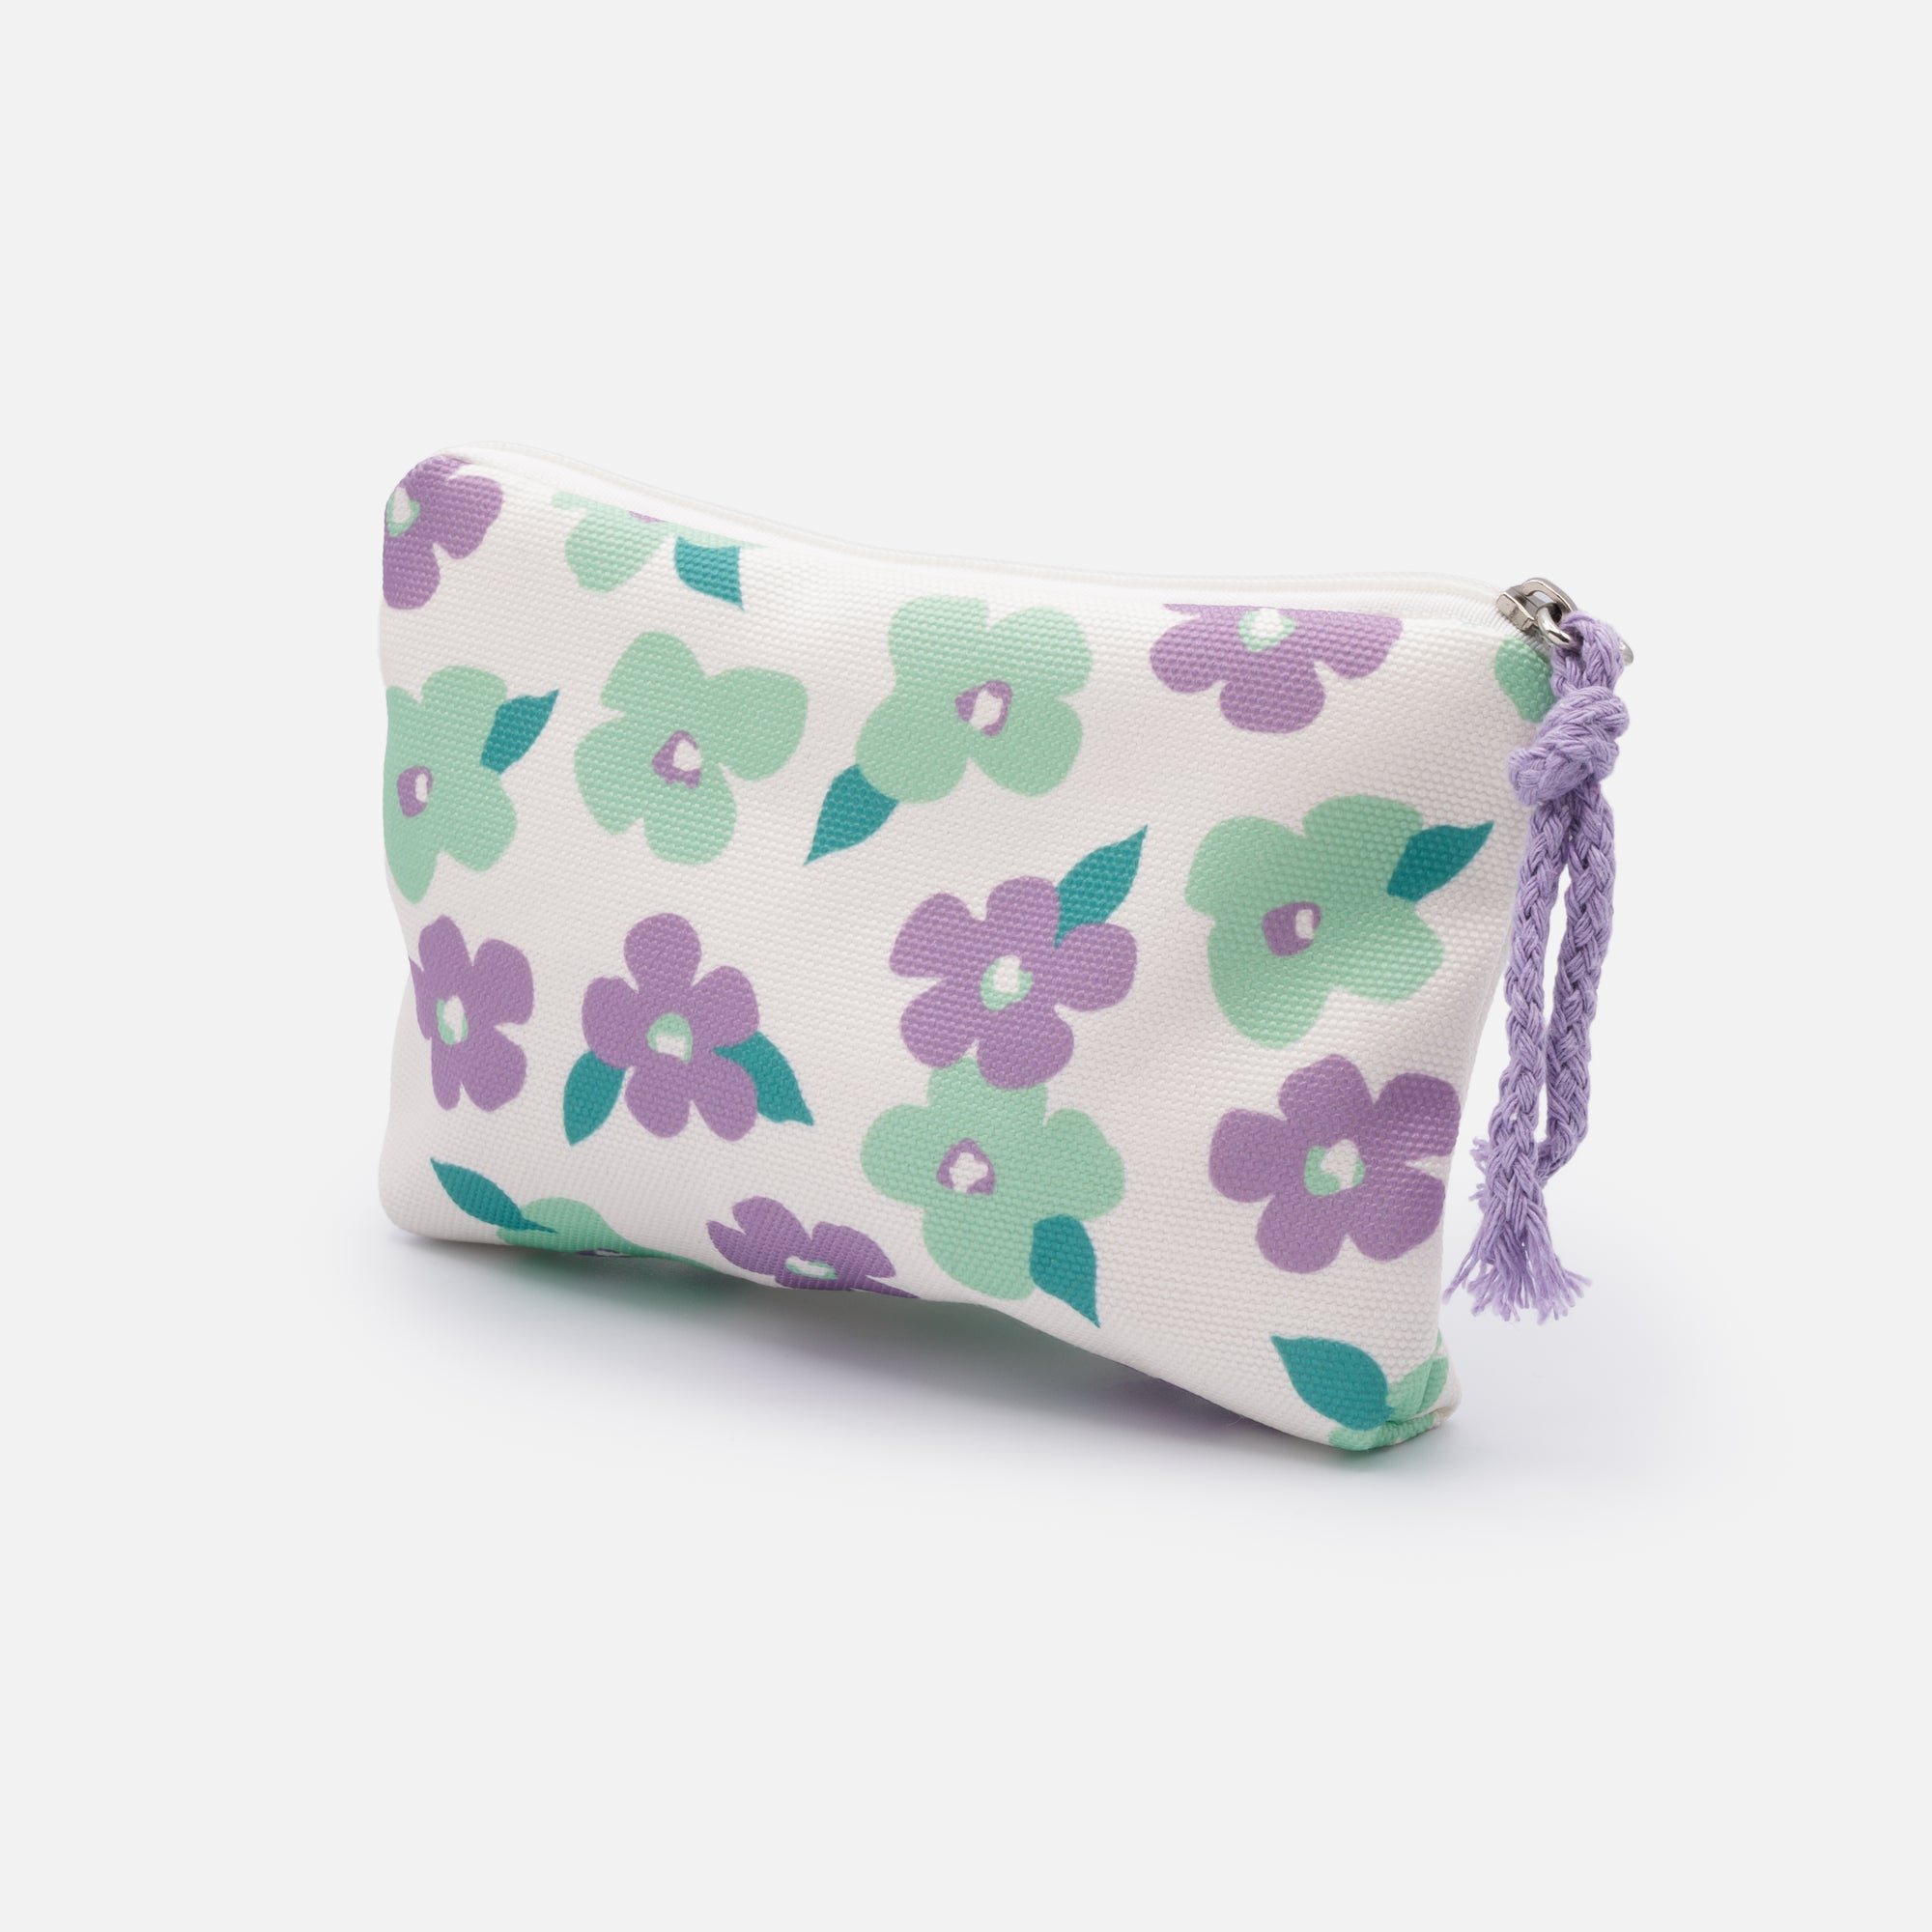 Small cosmetic bag with lilac and pale green flowers